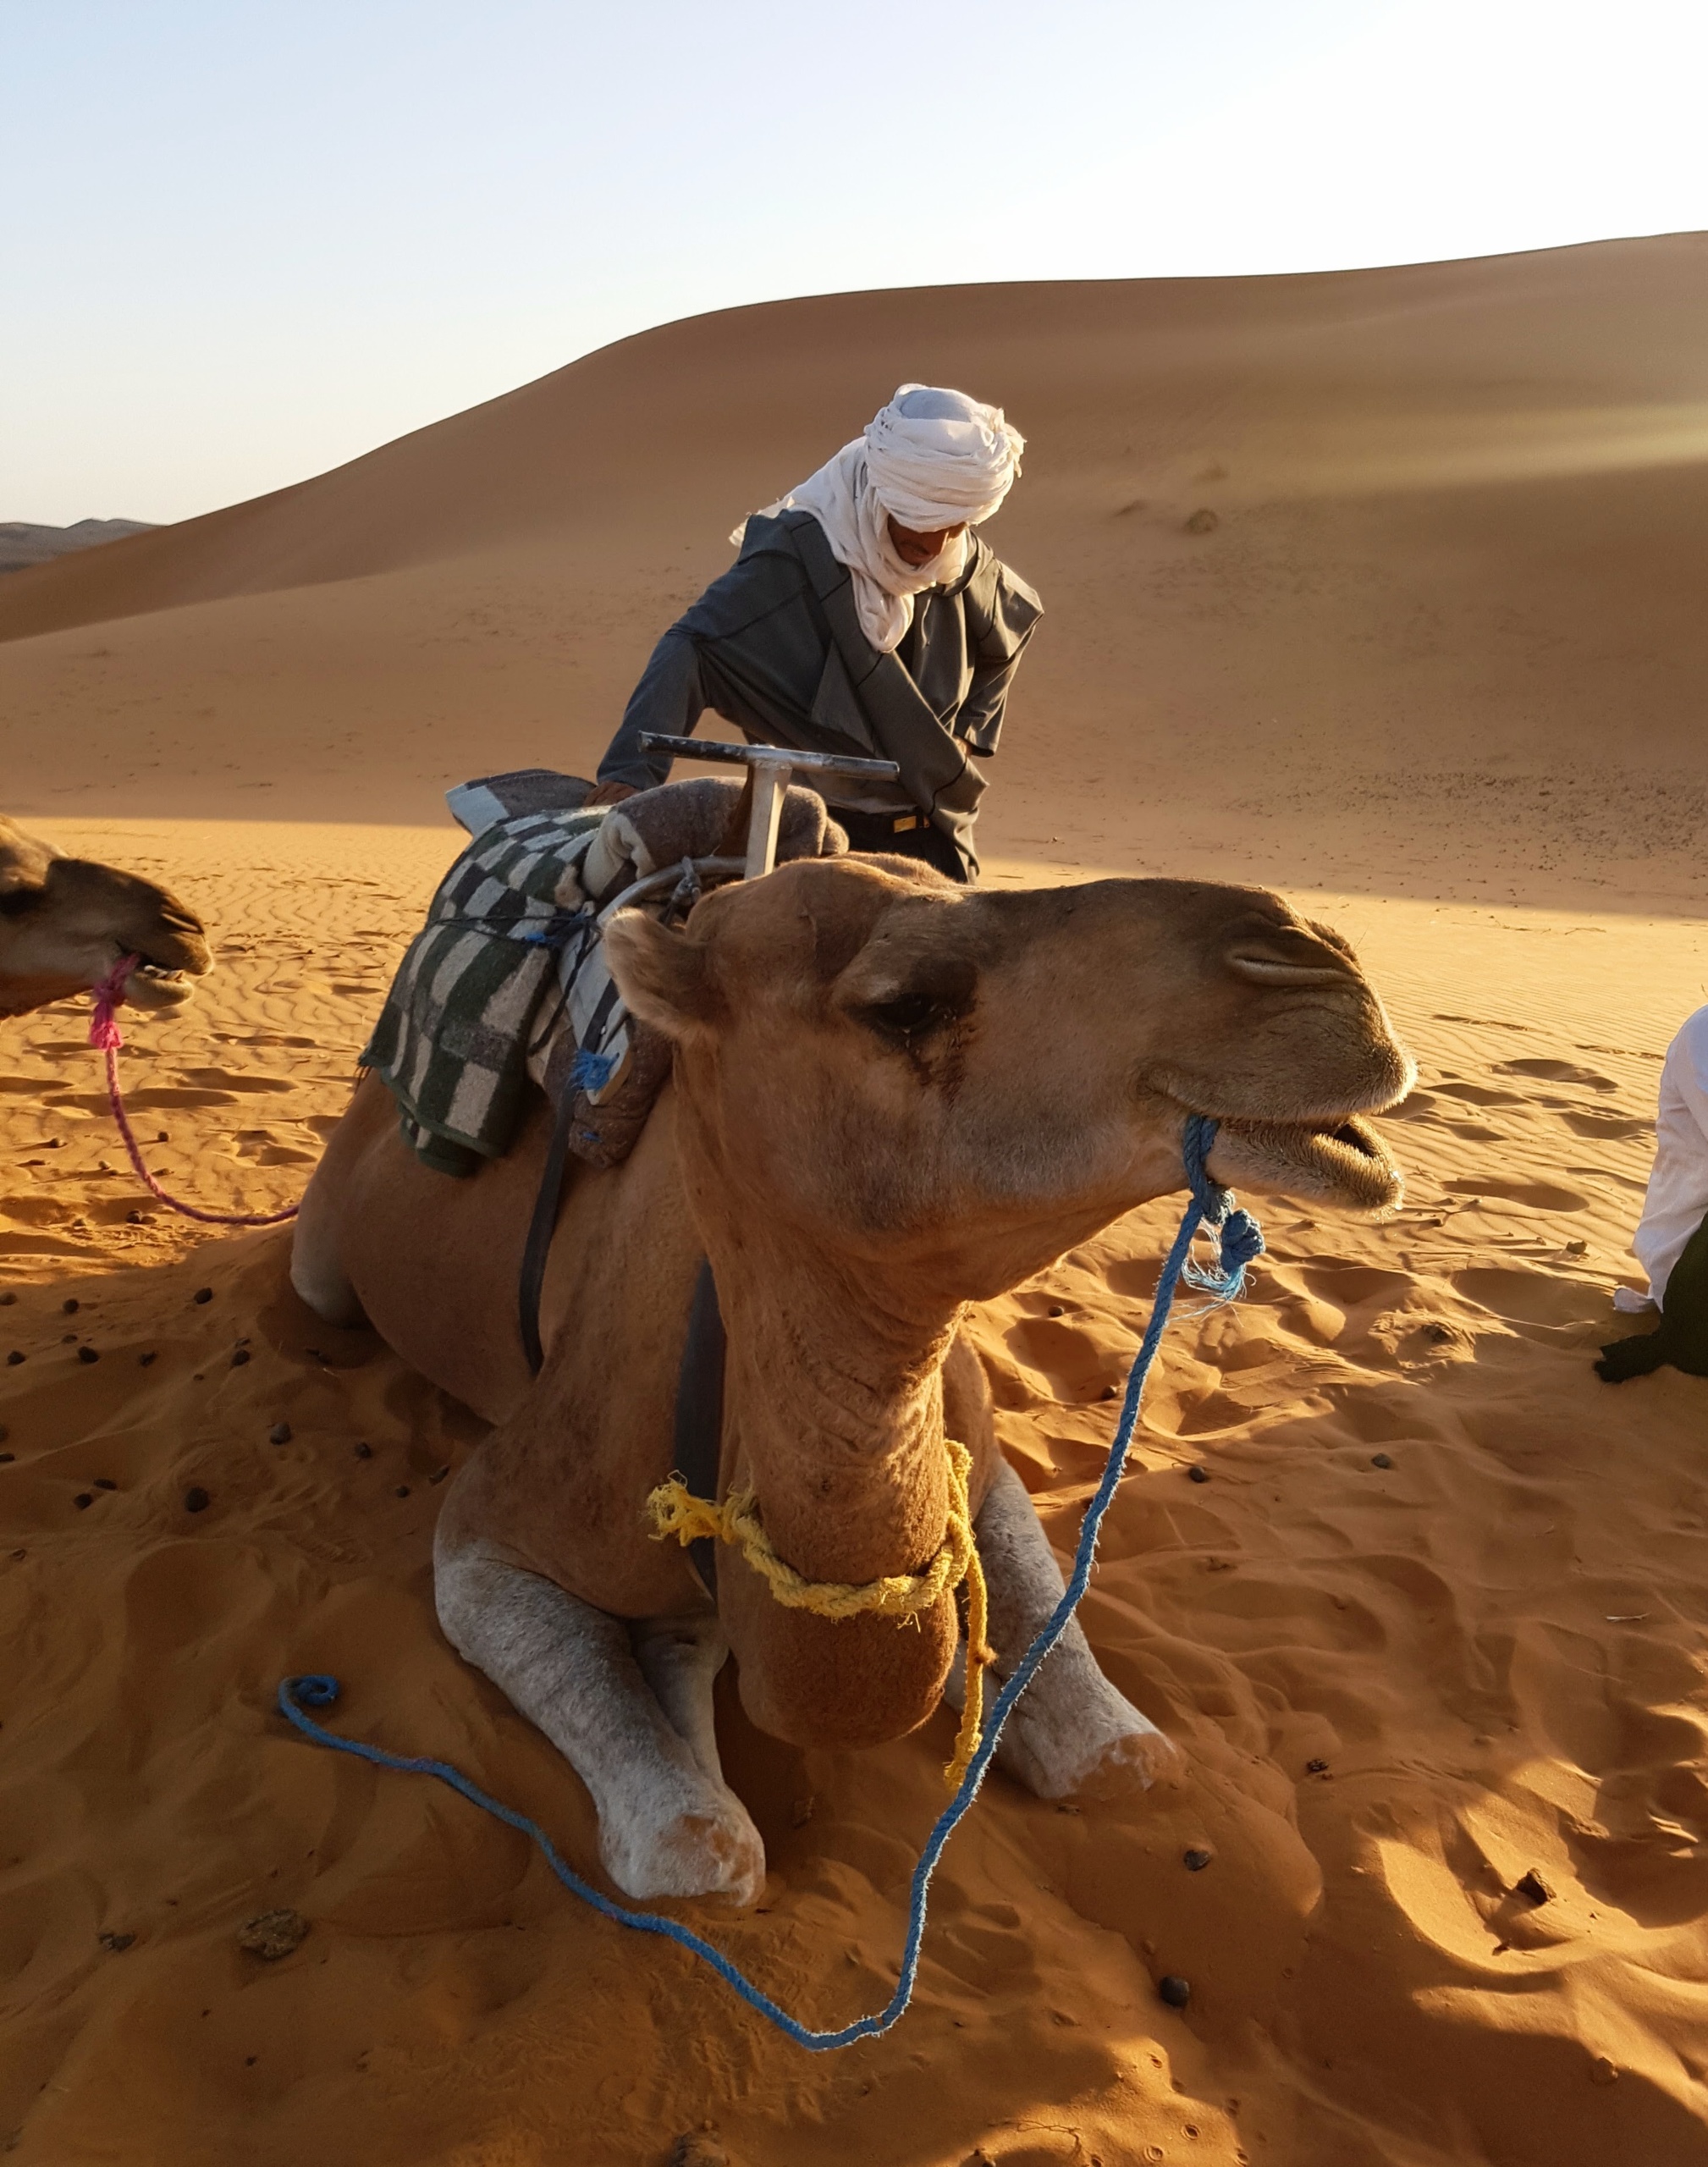 One of our camels in Erg Chebbi